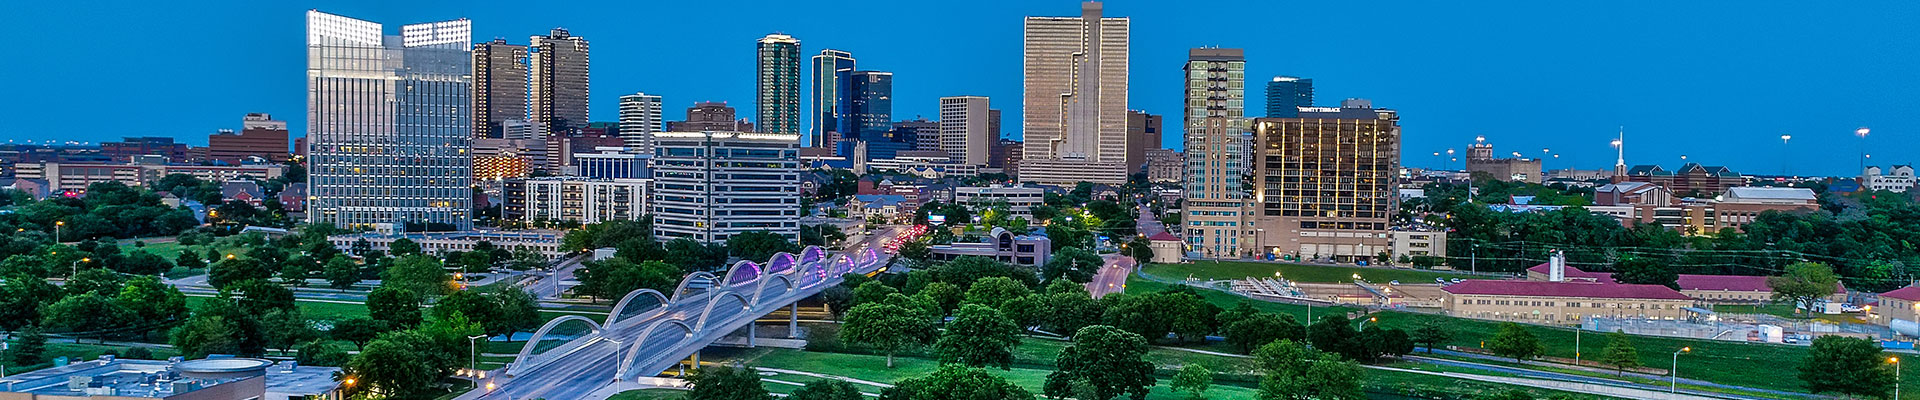 header image for the markets we serve page. Its a skyline of a large city with skyscrapers and bridges